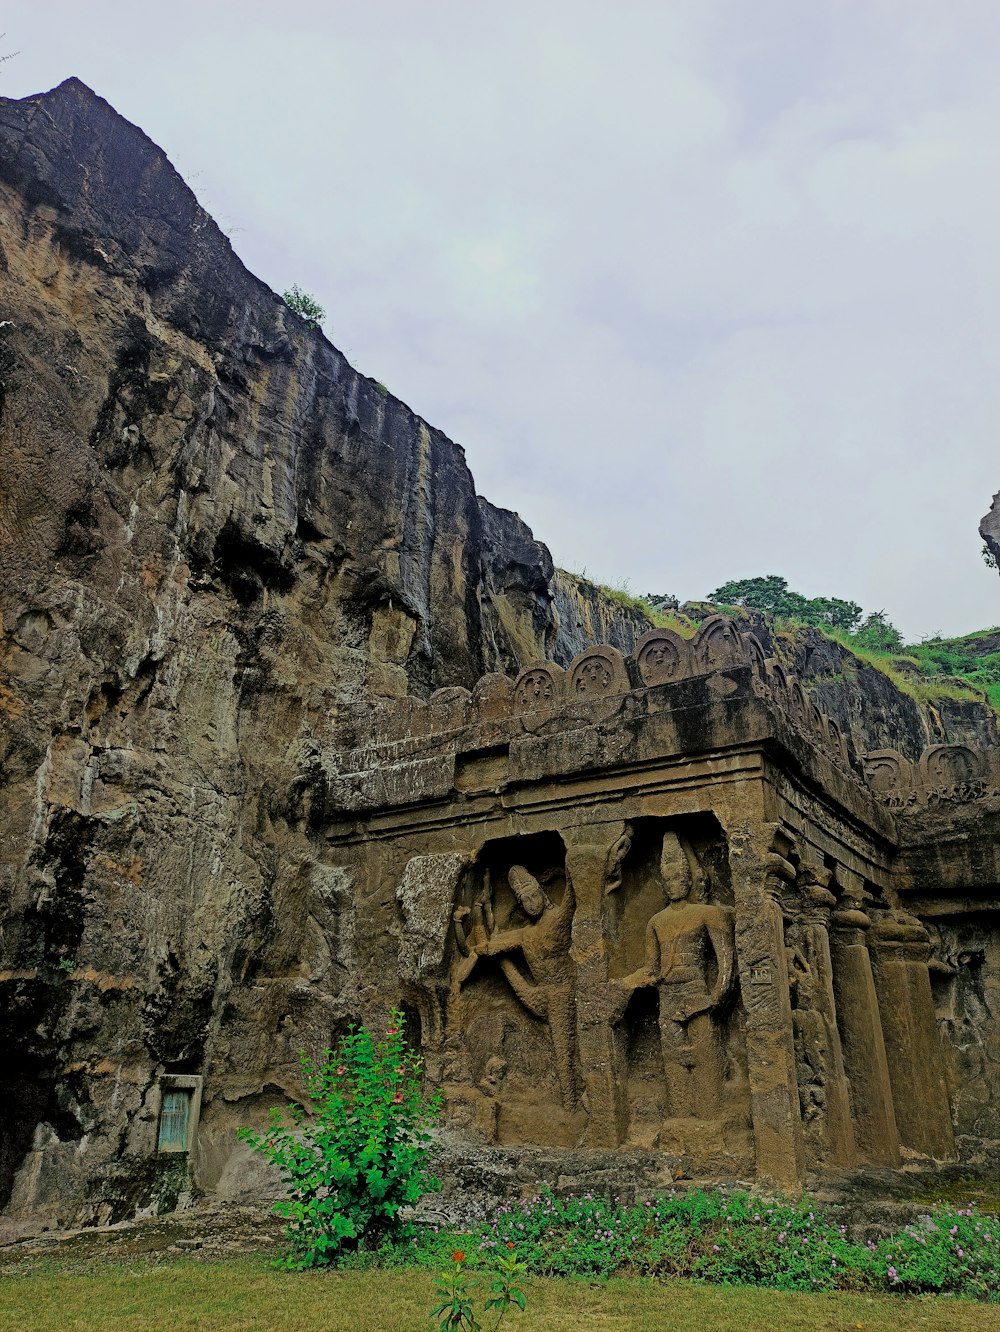 a large stone structure with carvings on the side of it